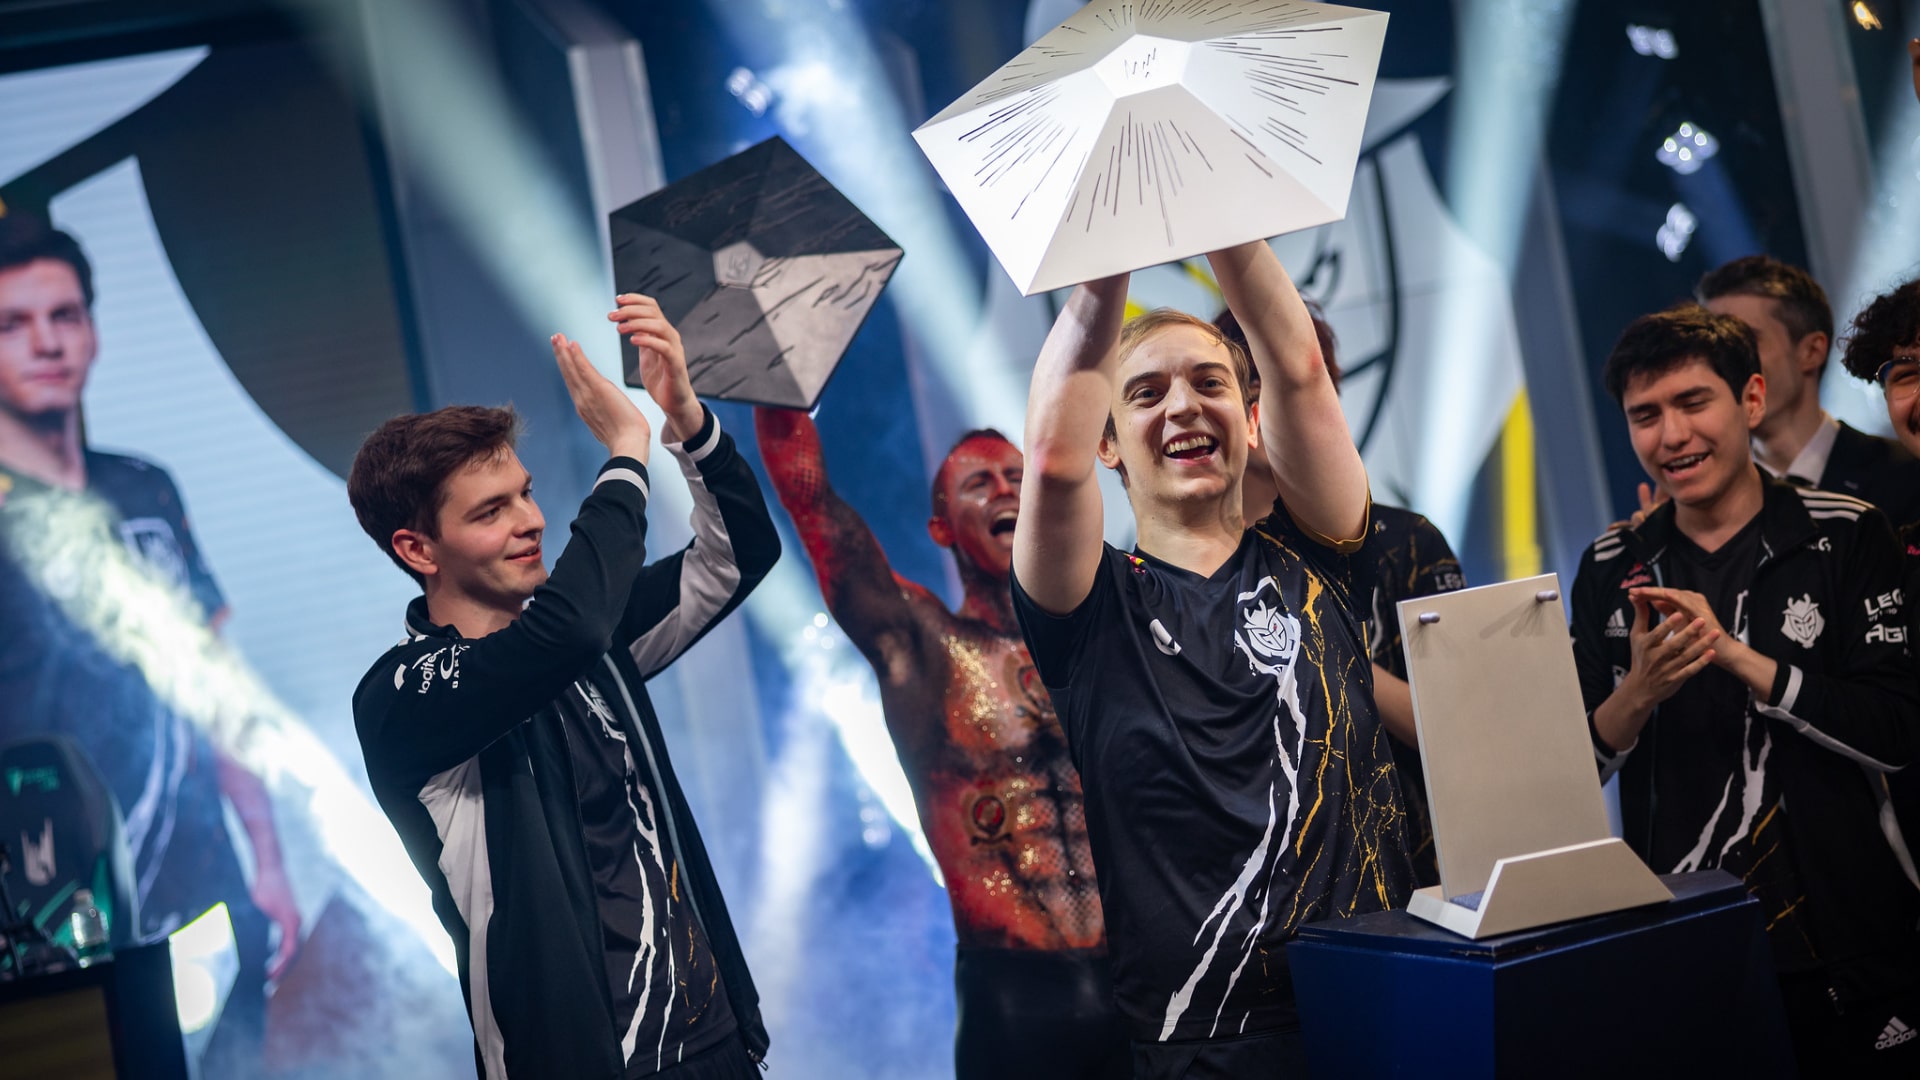 G2 Esports Caps is the most decorated player in LEC history ONE Esports